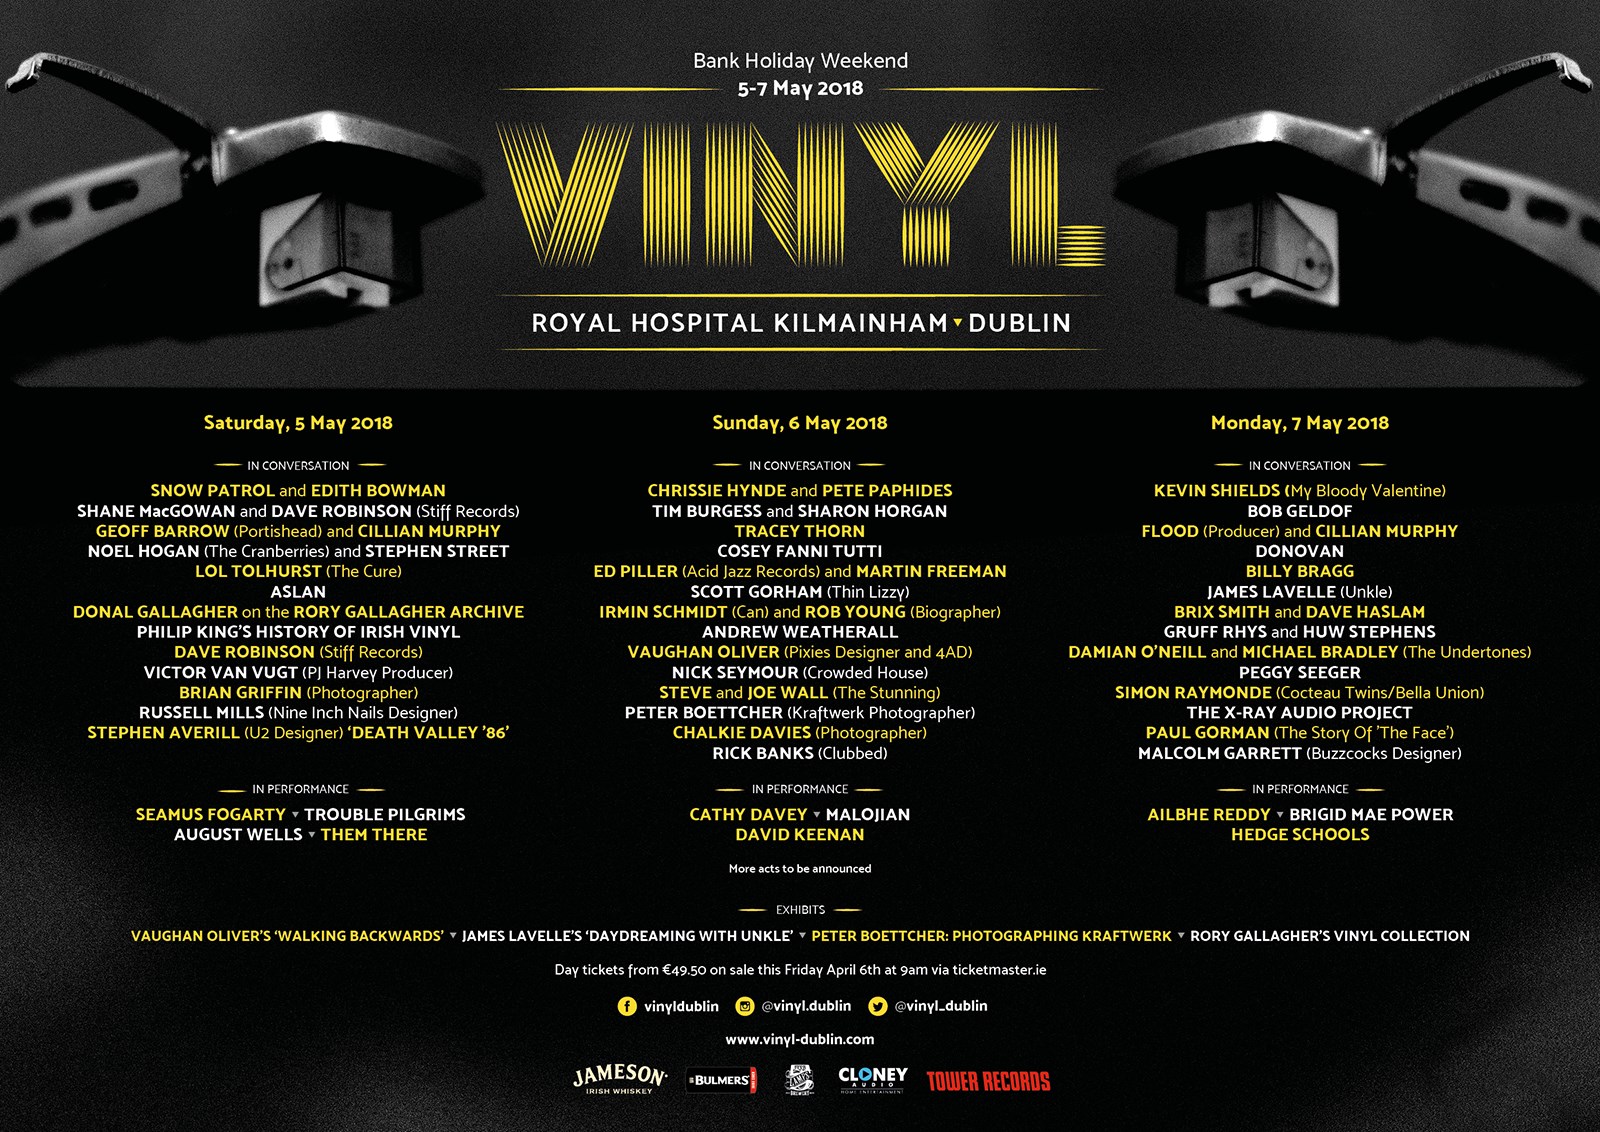 Image with the line up for Vinyl Dublin Event on May Bank Holiday Weekend